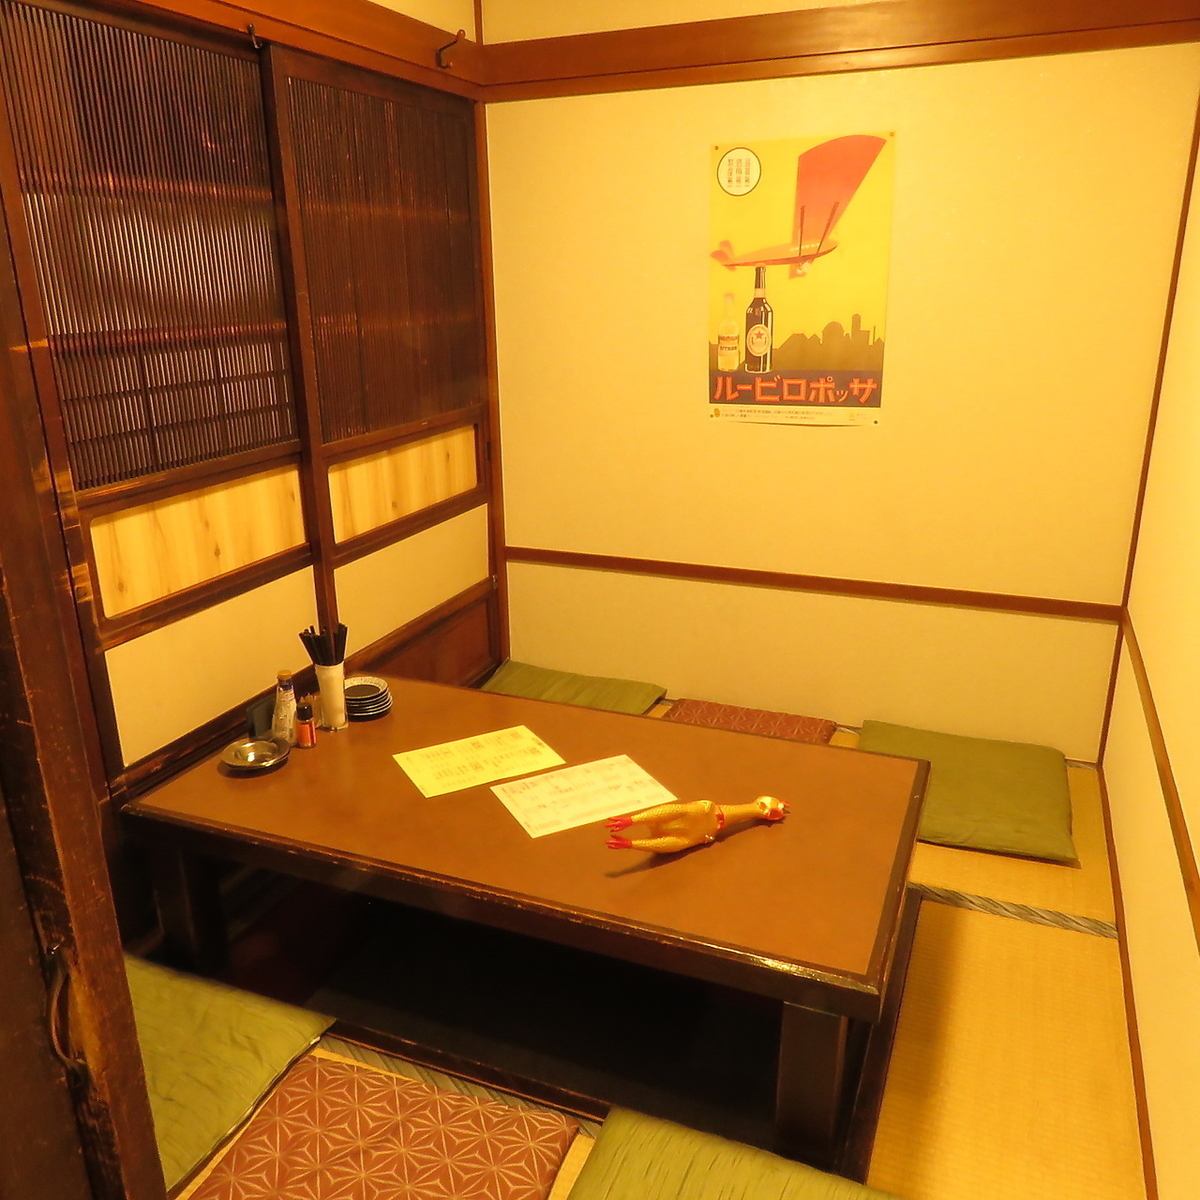 A popular neo-popular pub in Sendai ★Private rooms available ◎Public izakaya where all seats are smoking ♪